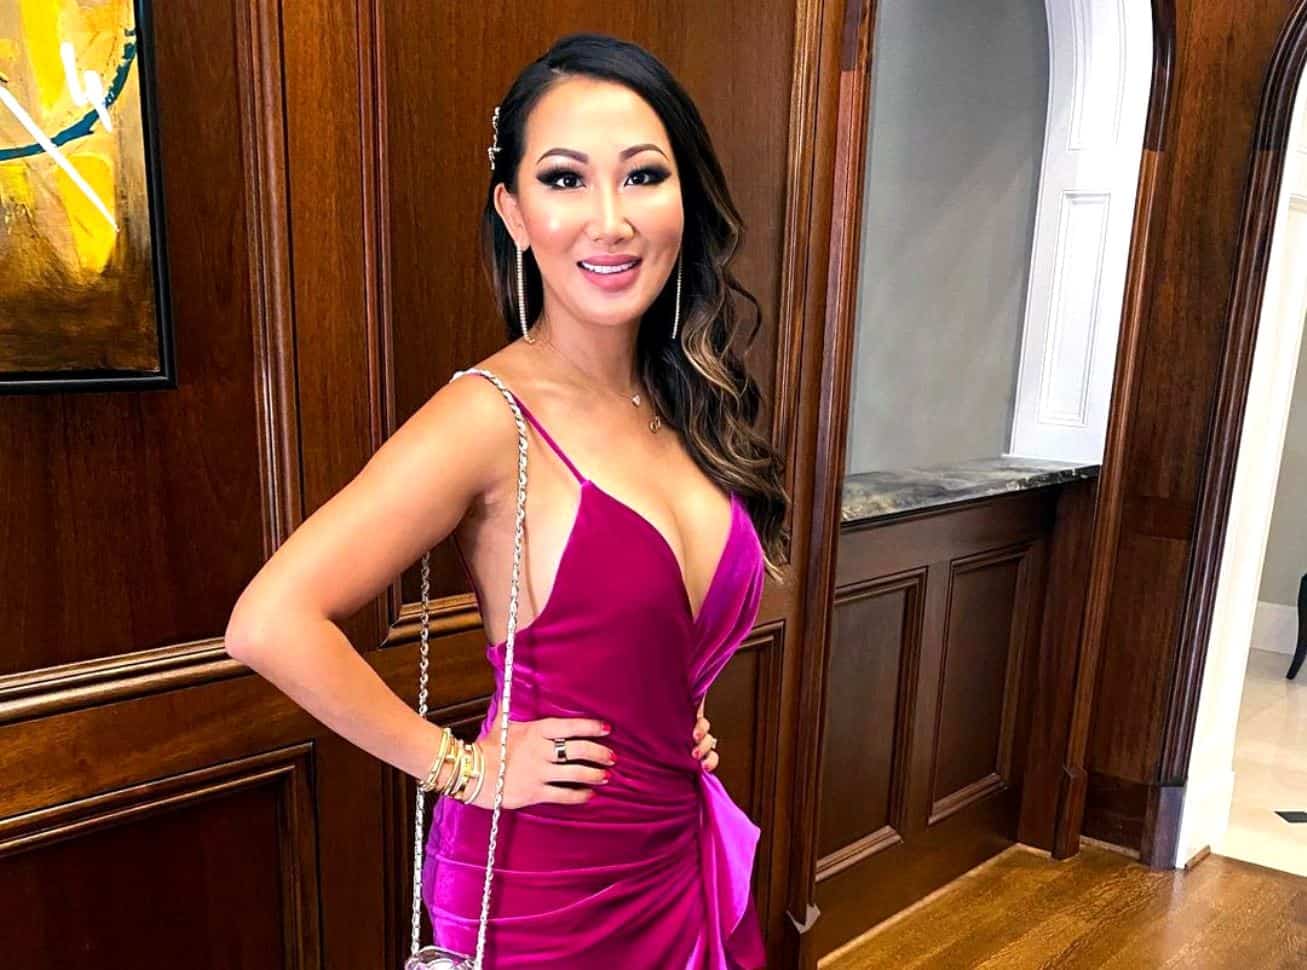 PHOTOS: RHOD Newbie Tiffany Moon Shows Off Her Gorgeous Mansion and Impressive Birkin Collection! Plus Live Viewing Thread